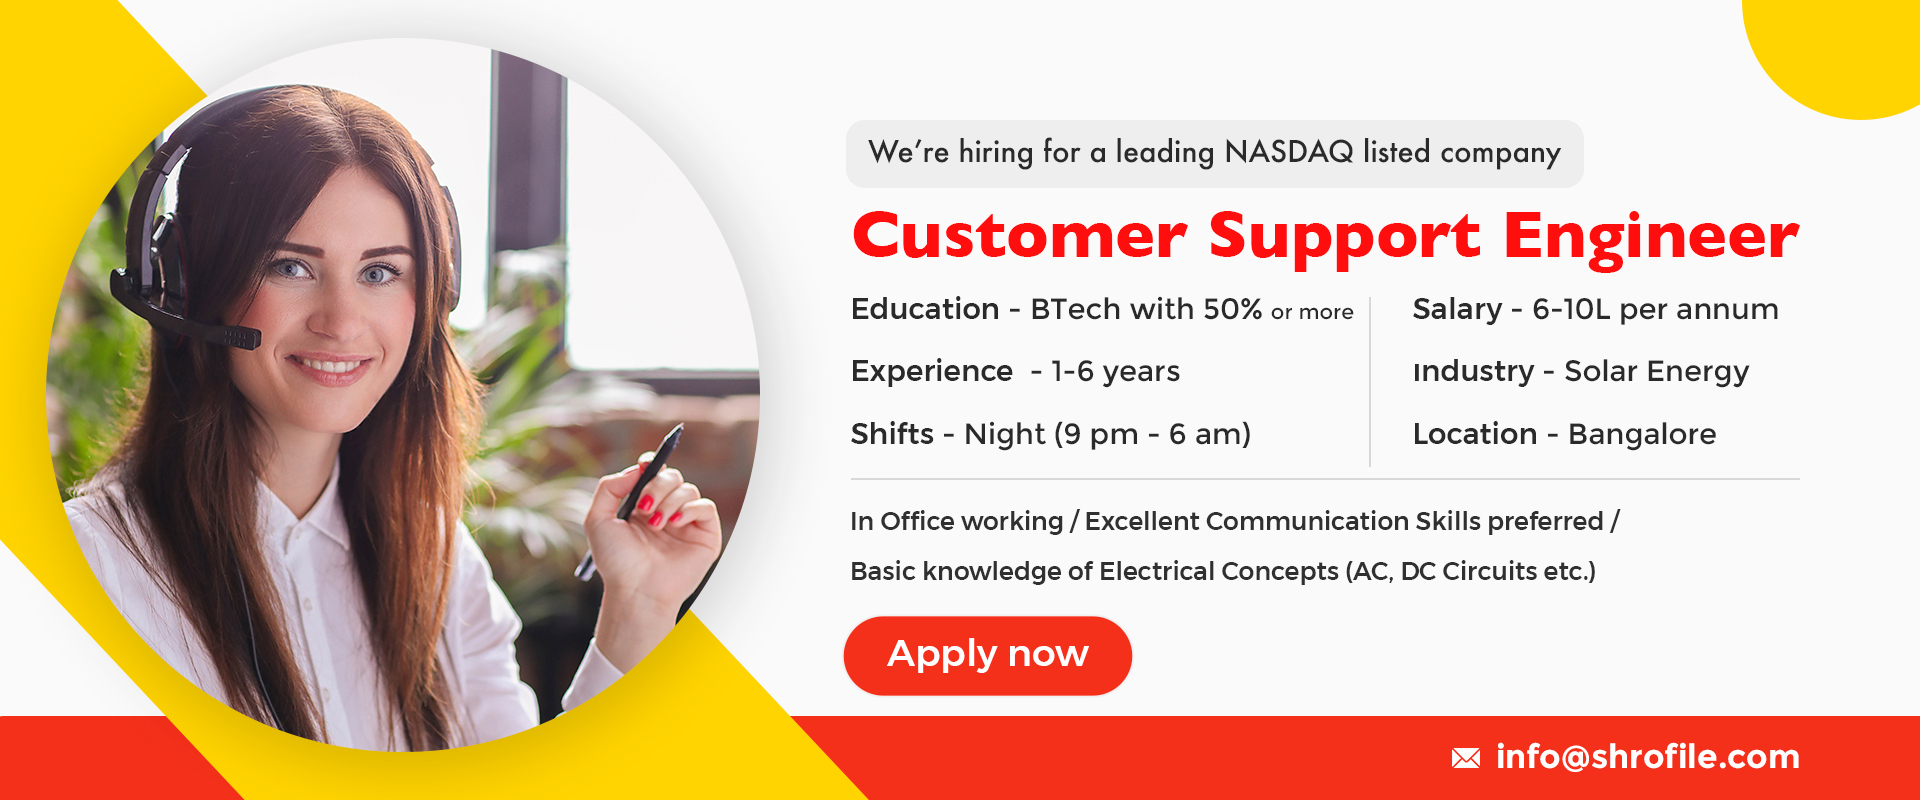 Customer Support Engineer Jobs In Bangalore